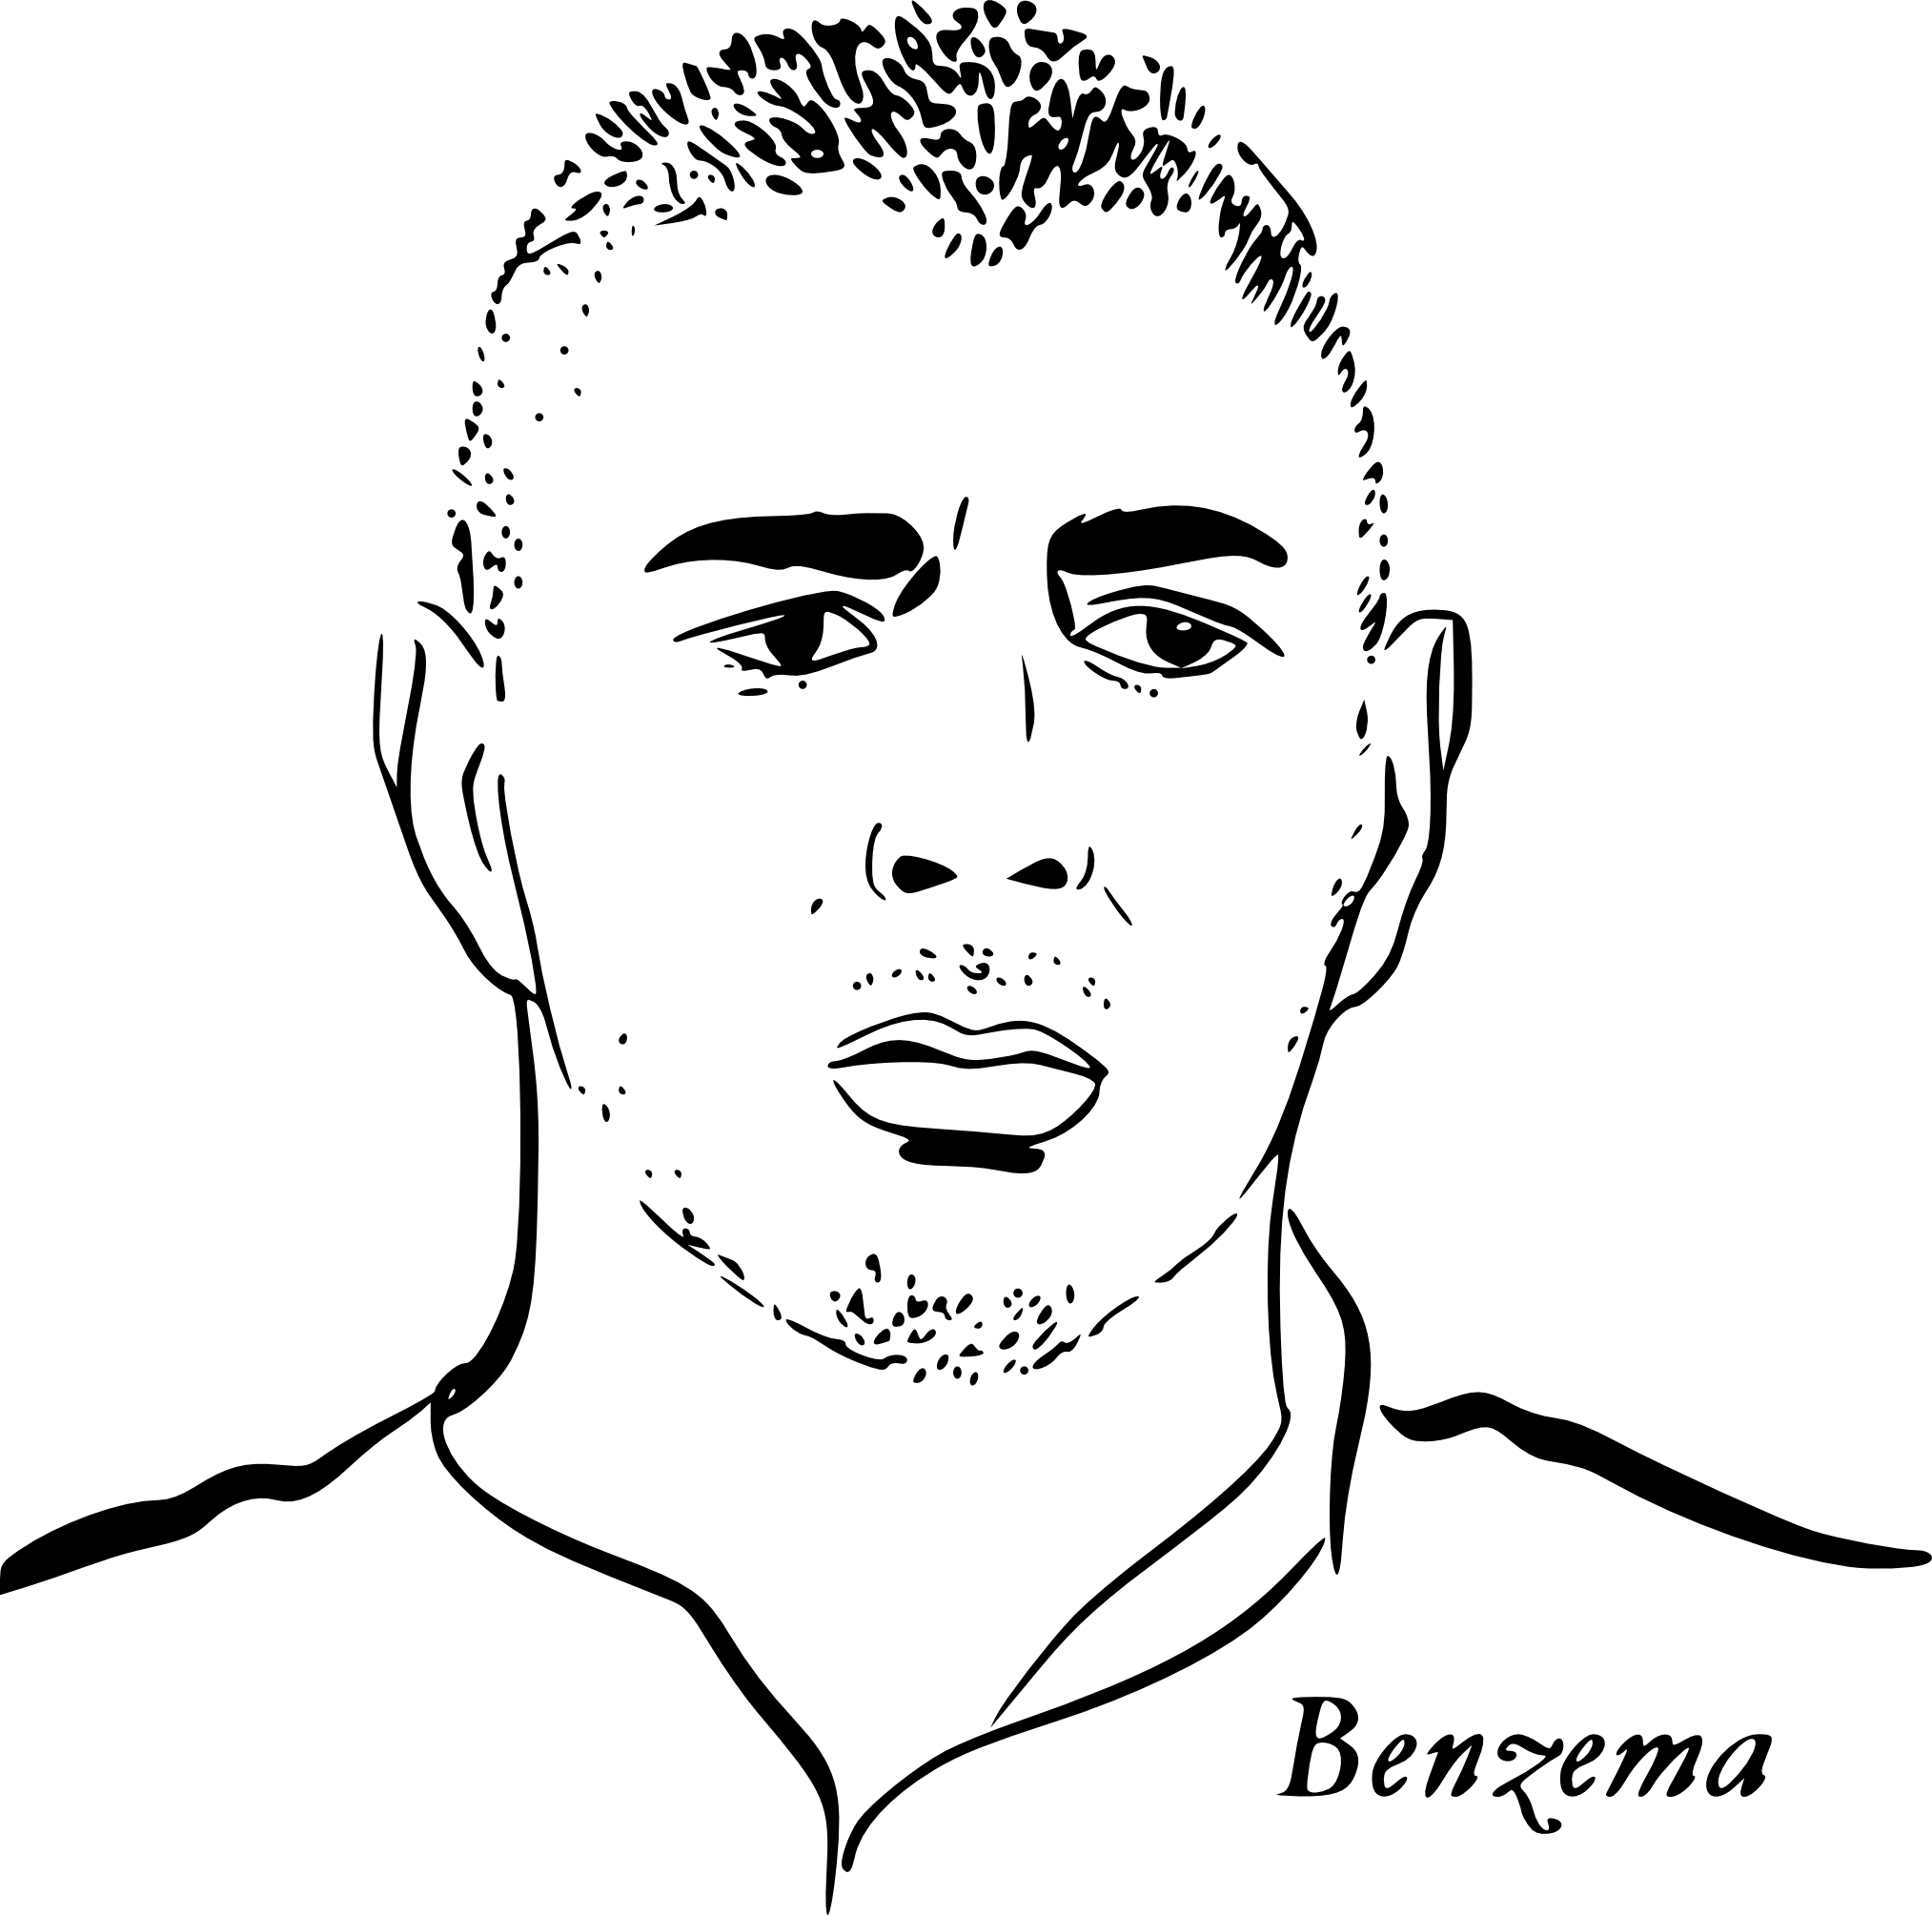 Benzema coloring page